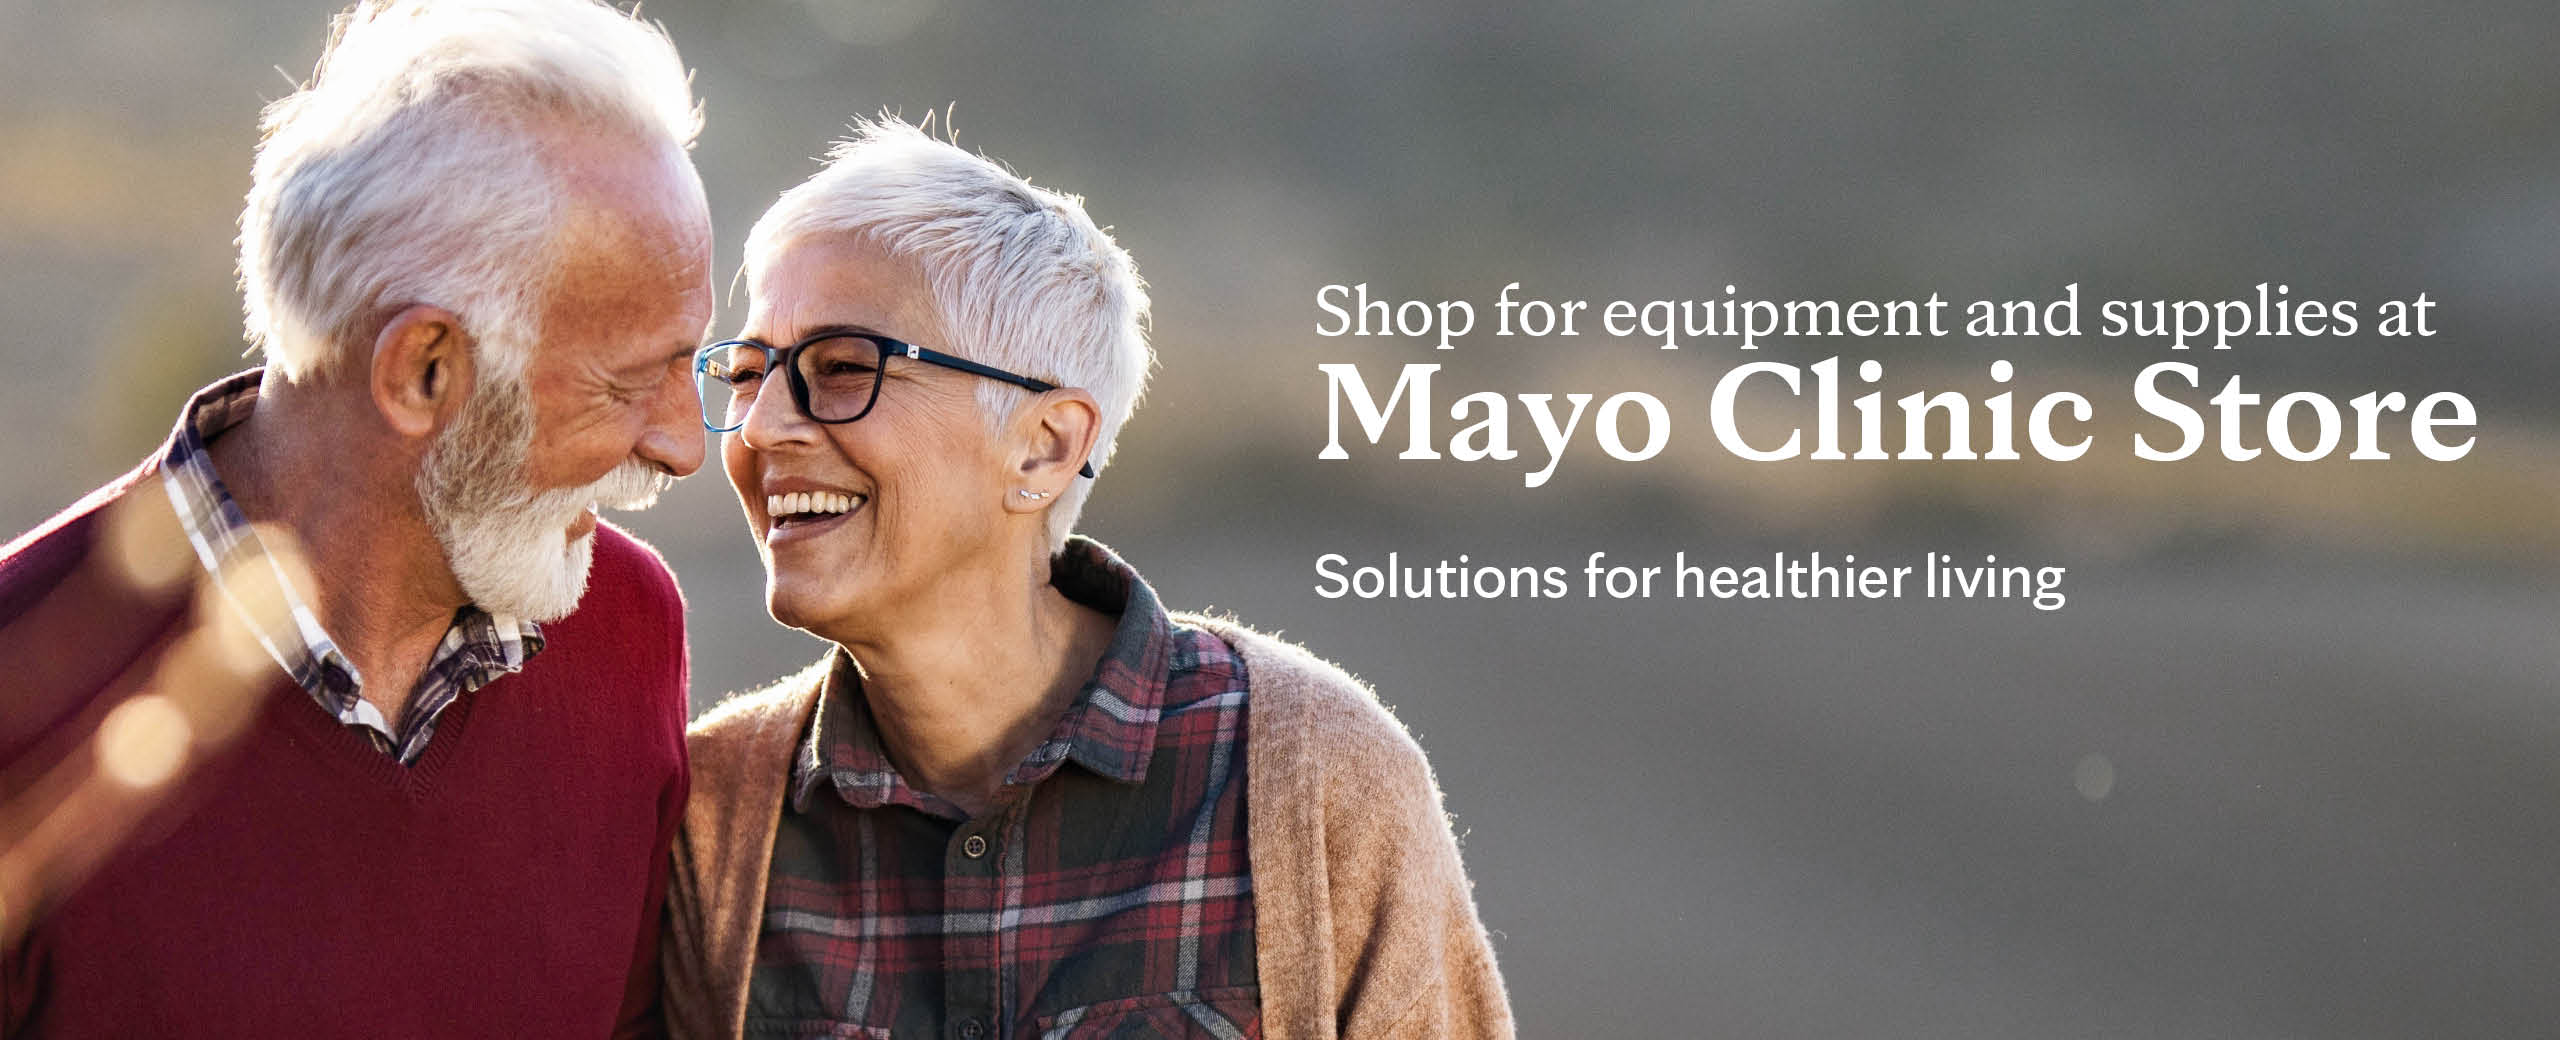 Shop for equipment and supplies at Mayo Clinic Store Solutions for healthier living